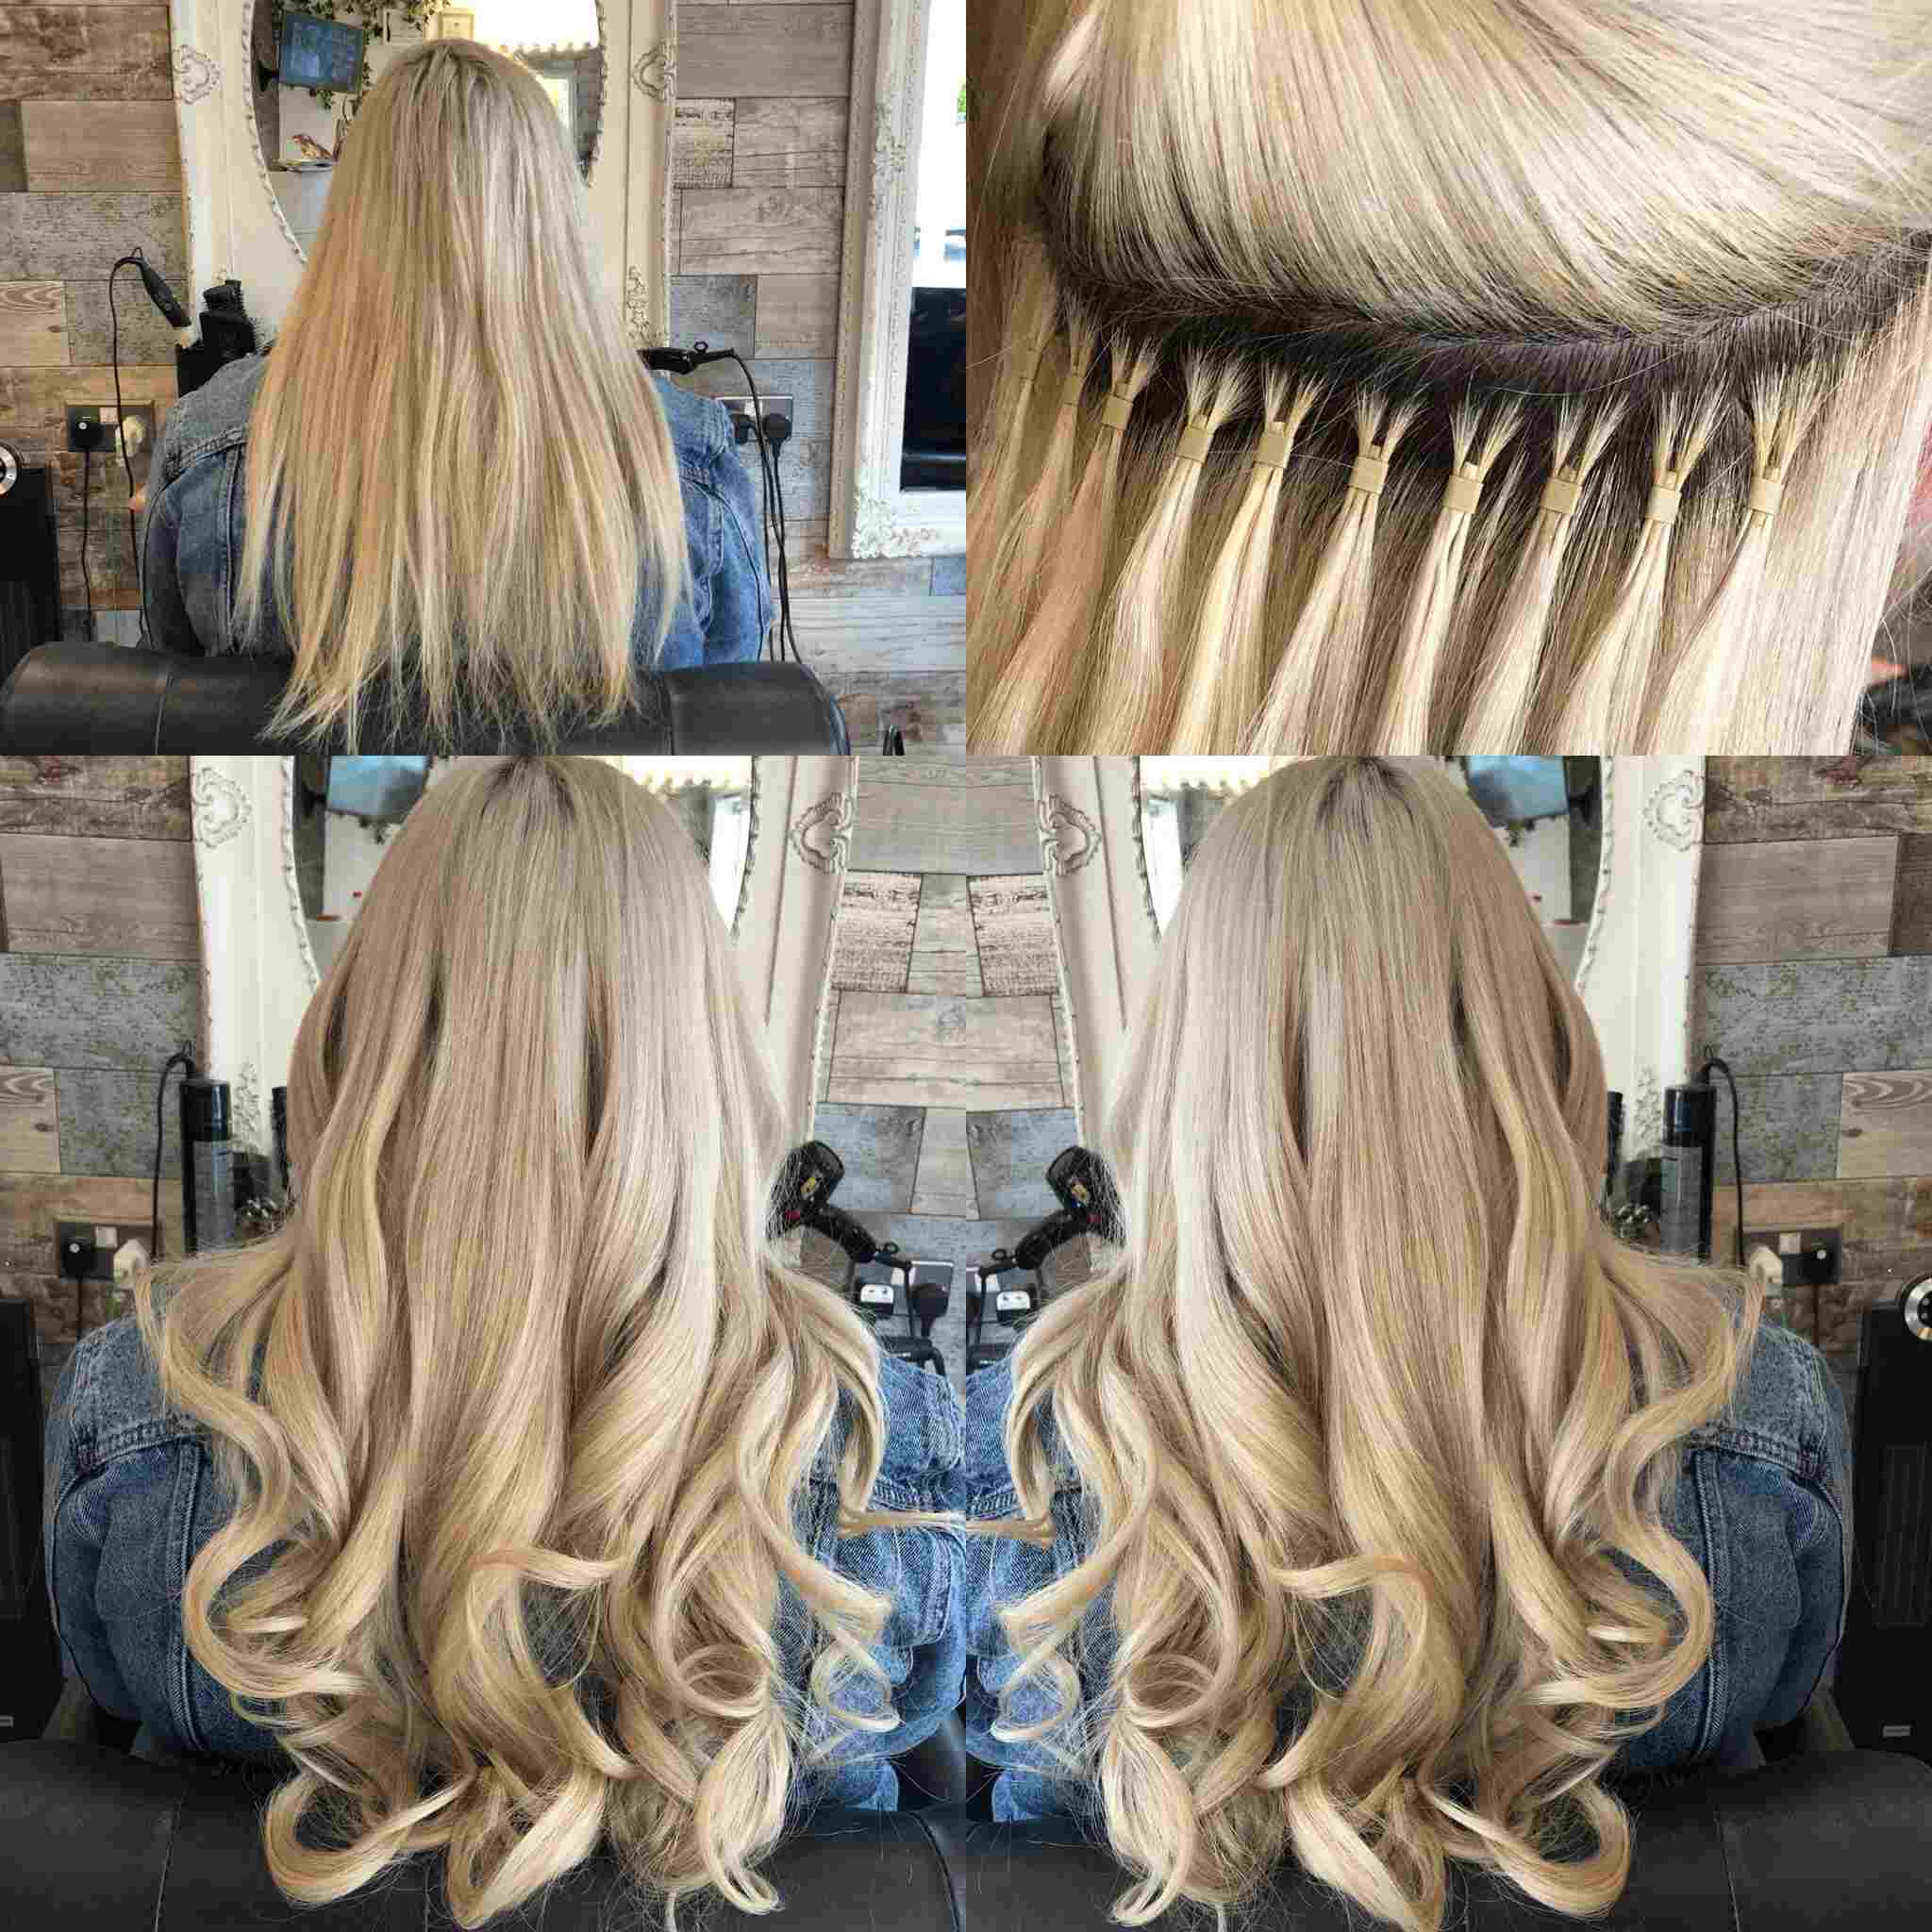 Enhance Your Look with ITip Hair Extensions Strands - Premium Quality Extensions at Che Academy